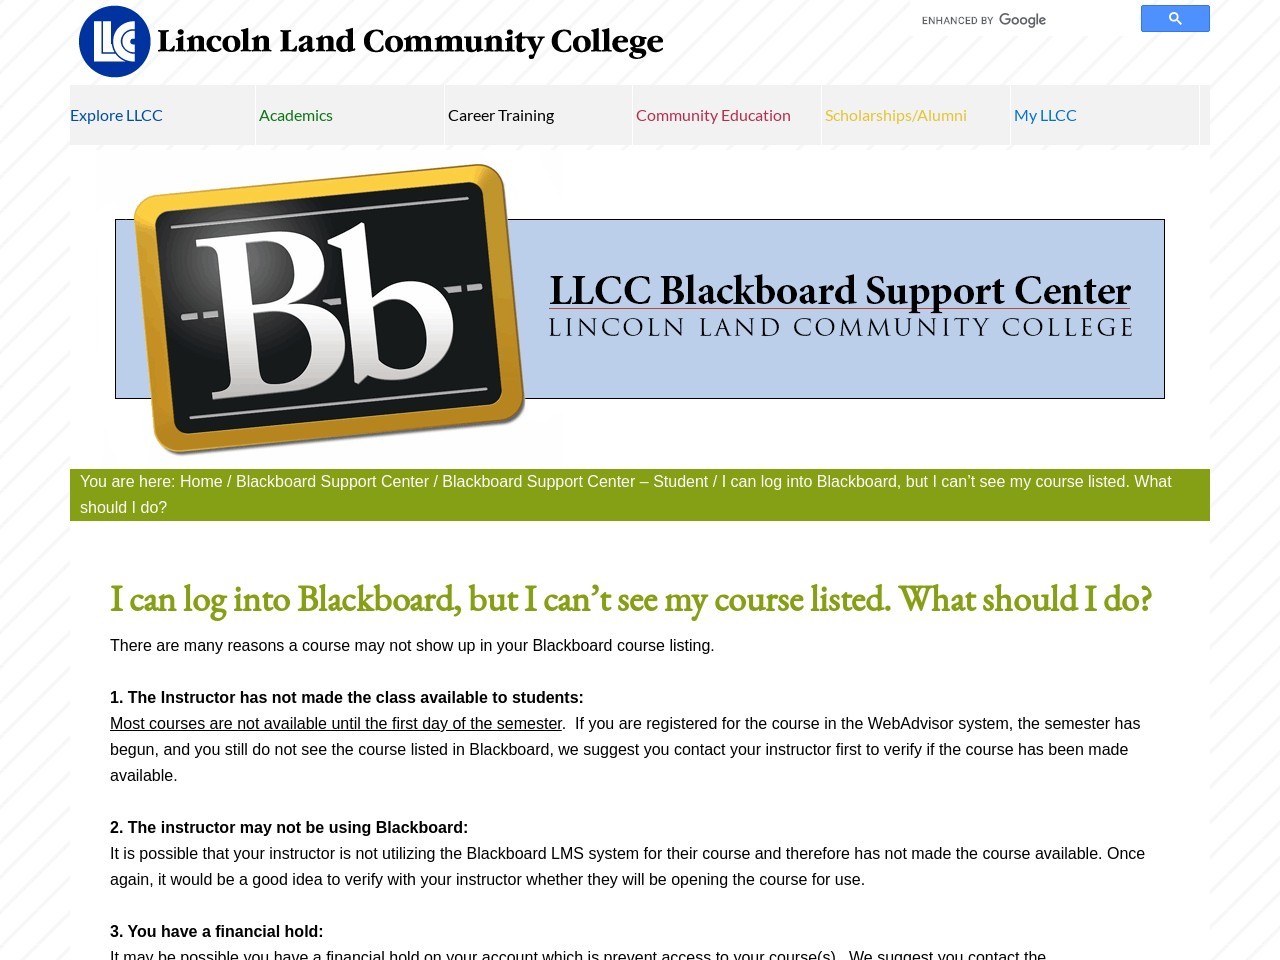 I can log into Blackboard, but I can't see my course listed ...